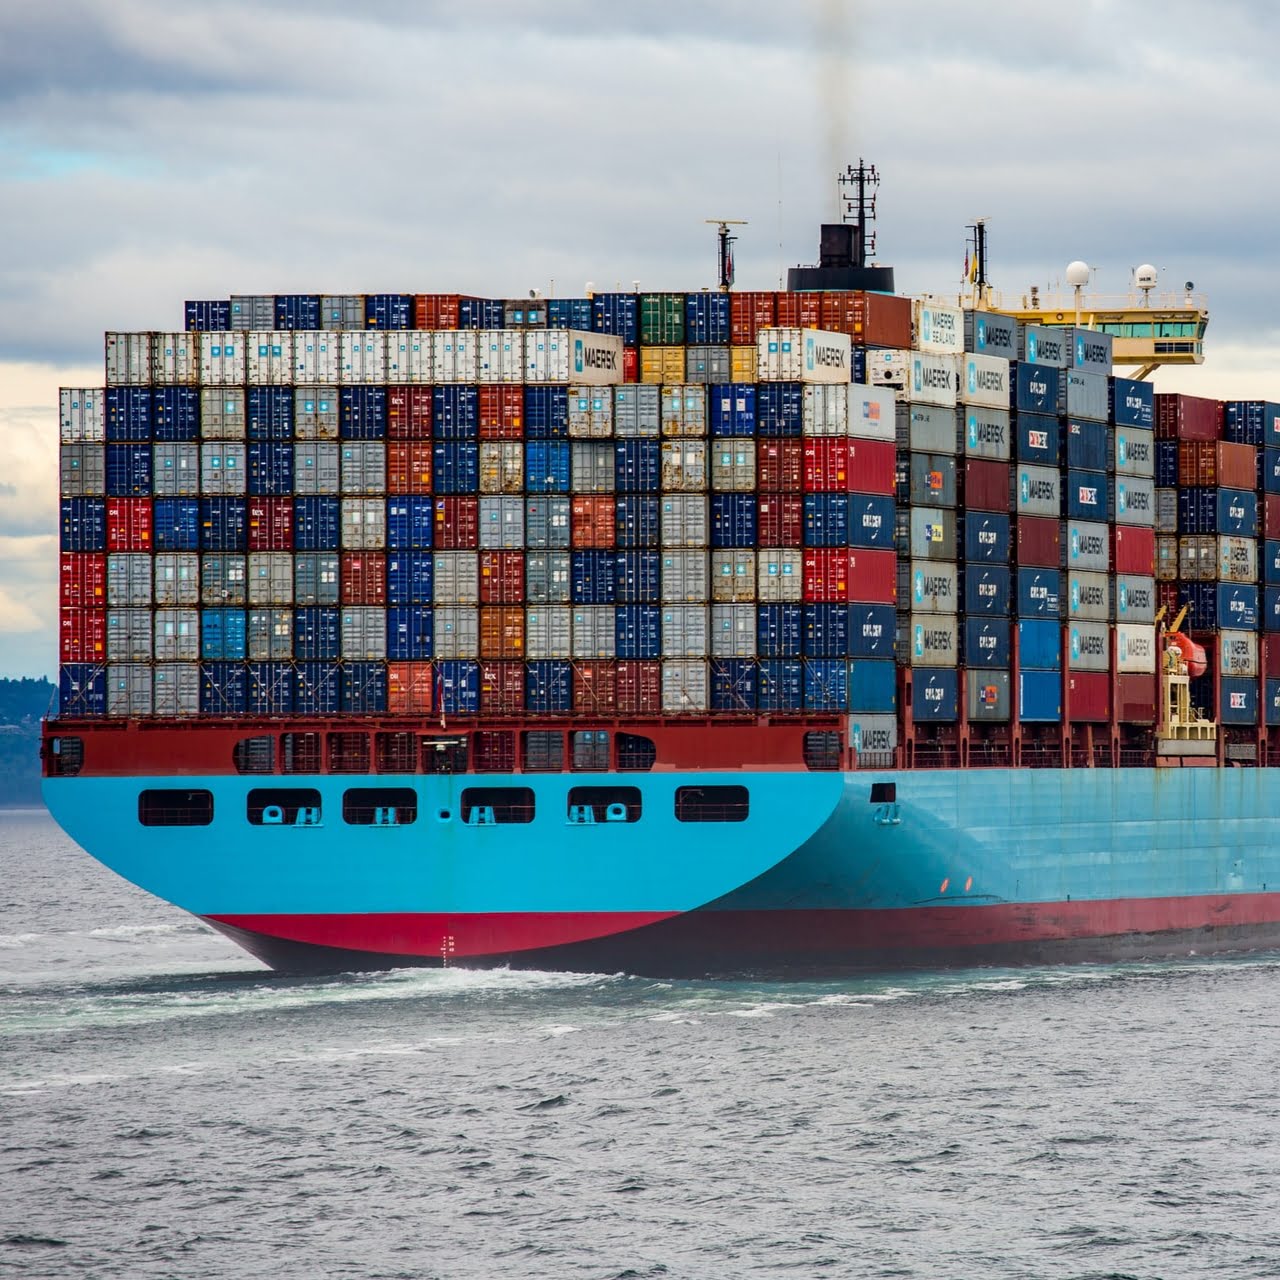 ETS: Expansion To Ships, Buildings And Transport